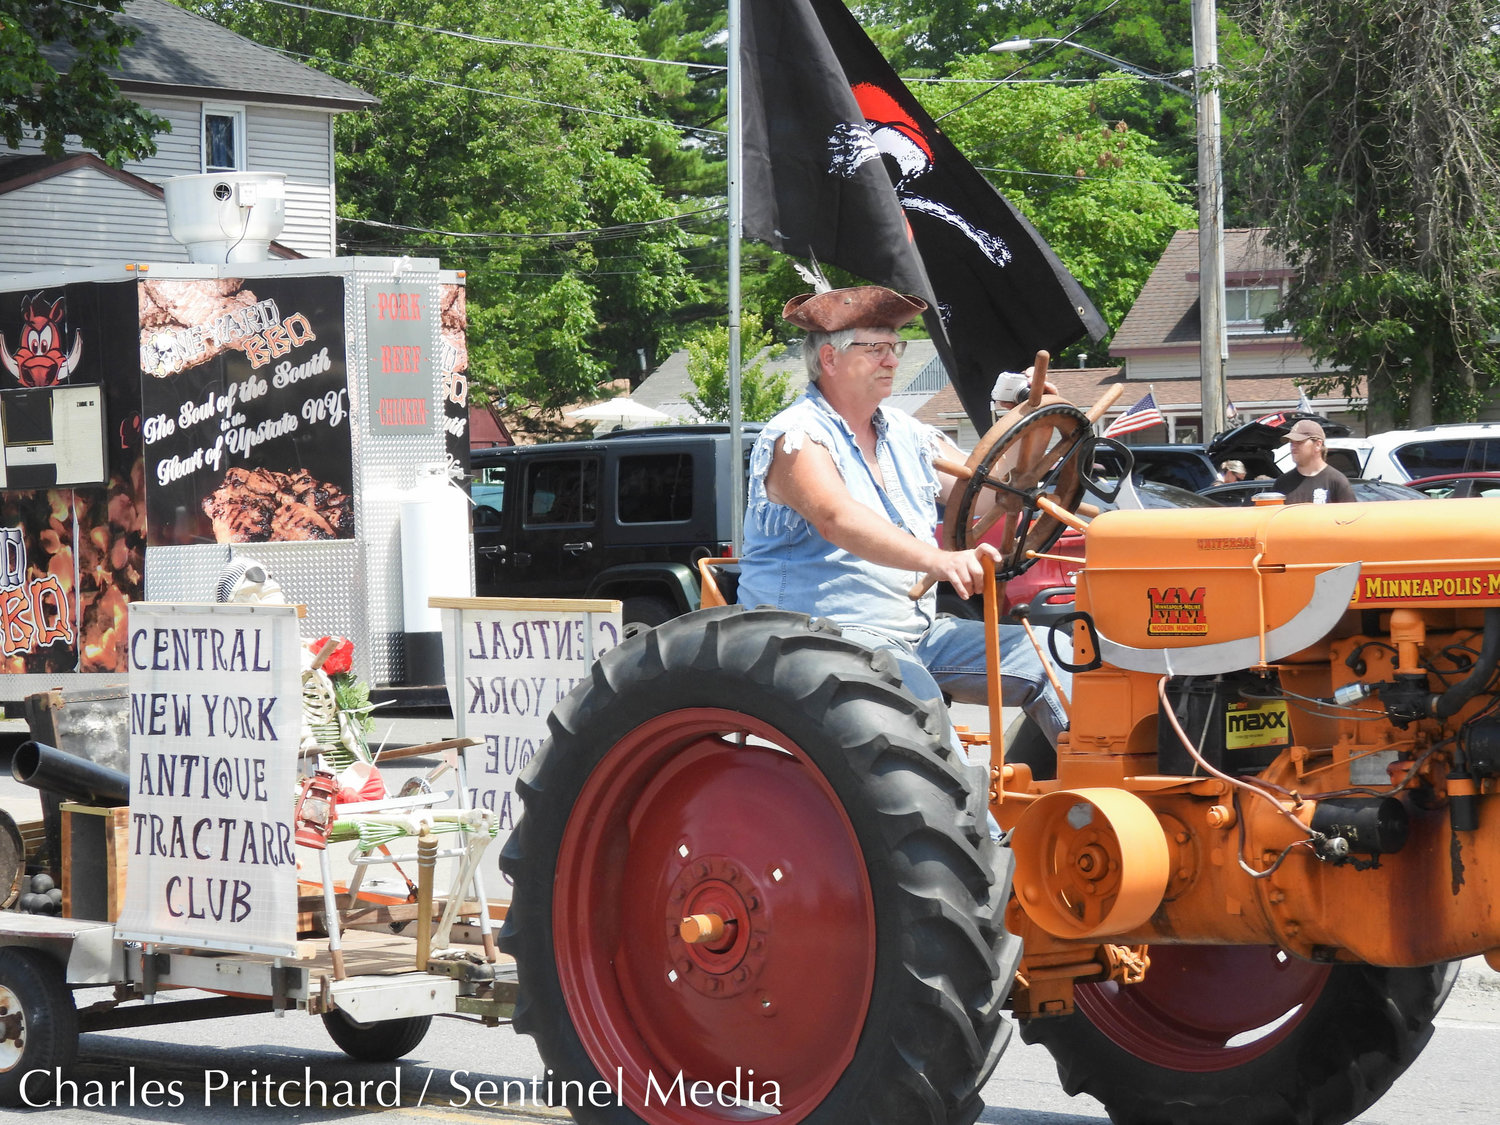 The Sylvan Beach Pirate's Parade makes its way down Main Street. Pictured is the Central New York Antique "TractARR" Club, with tractors outfitted to resemble pirate ships.